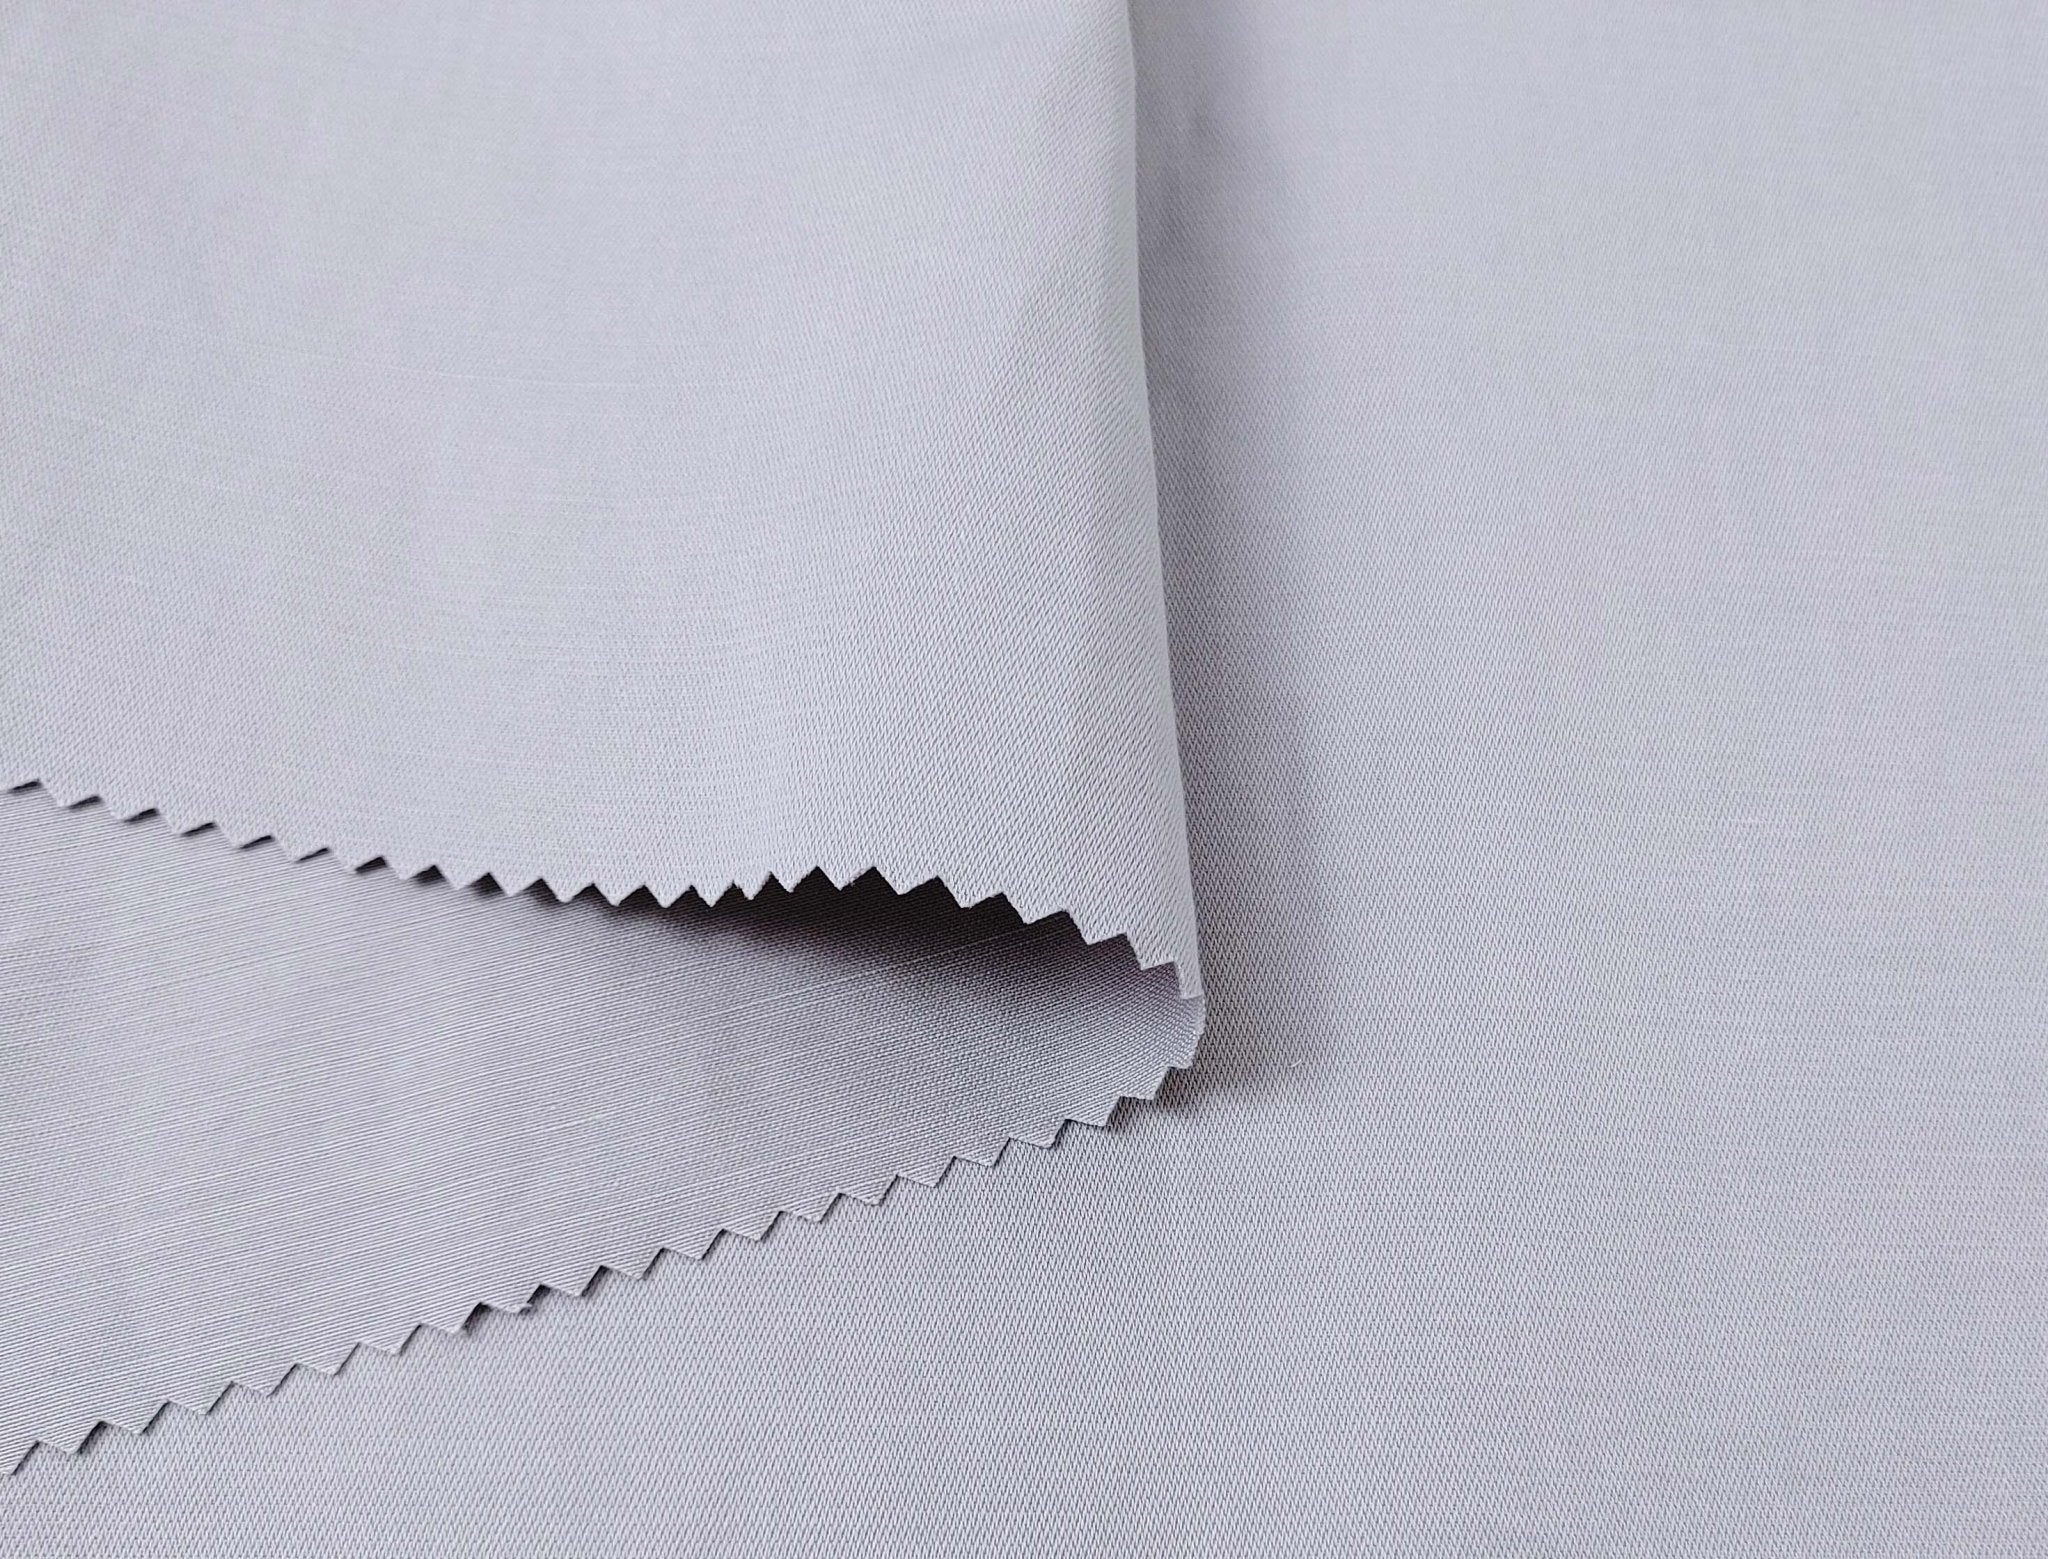 Ramie Cotton Fabric: Light Grey Broken Twill Weave with Glossy Finish 3585 - The Linen Lab - Grey